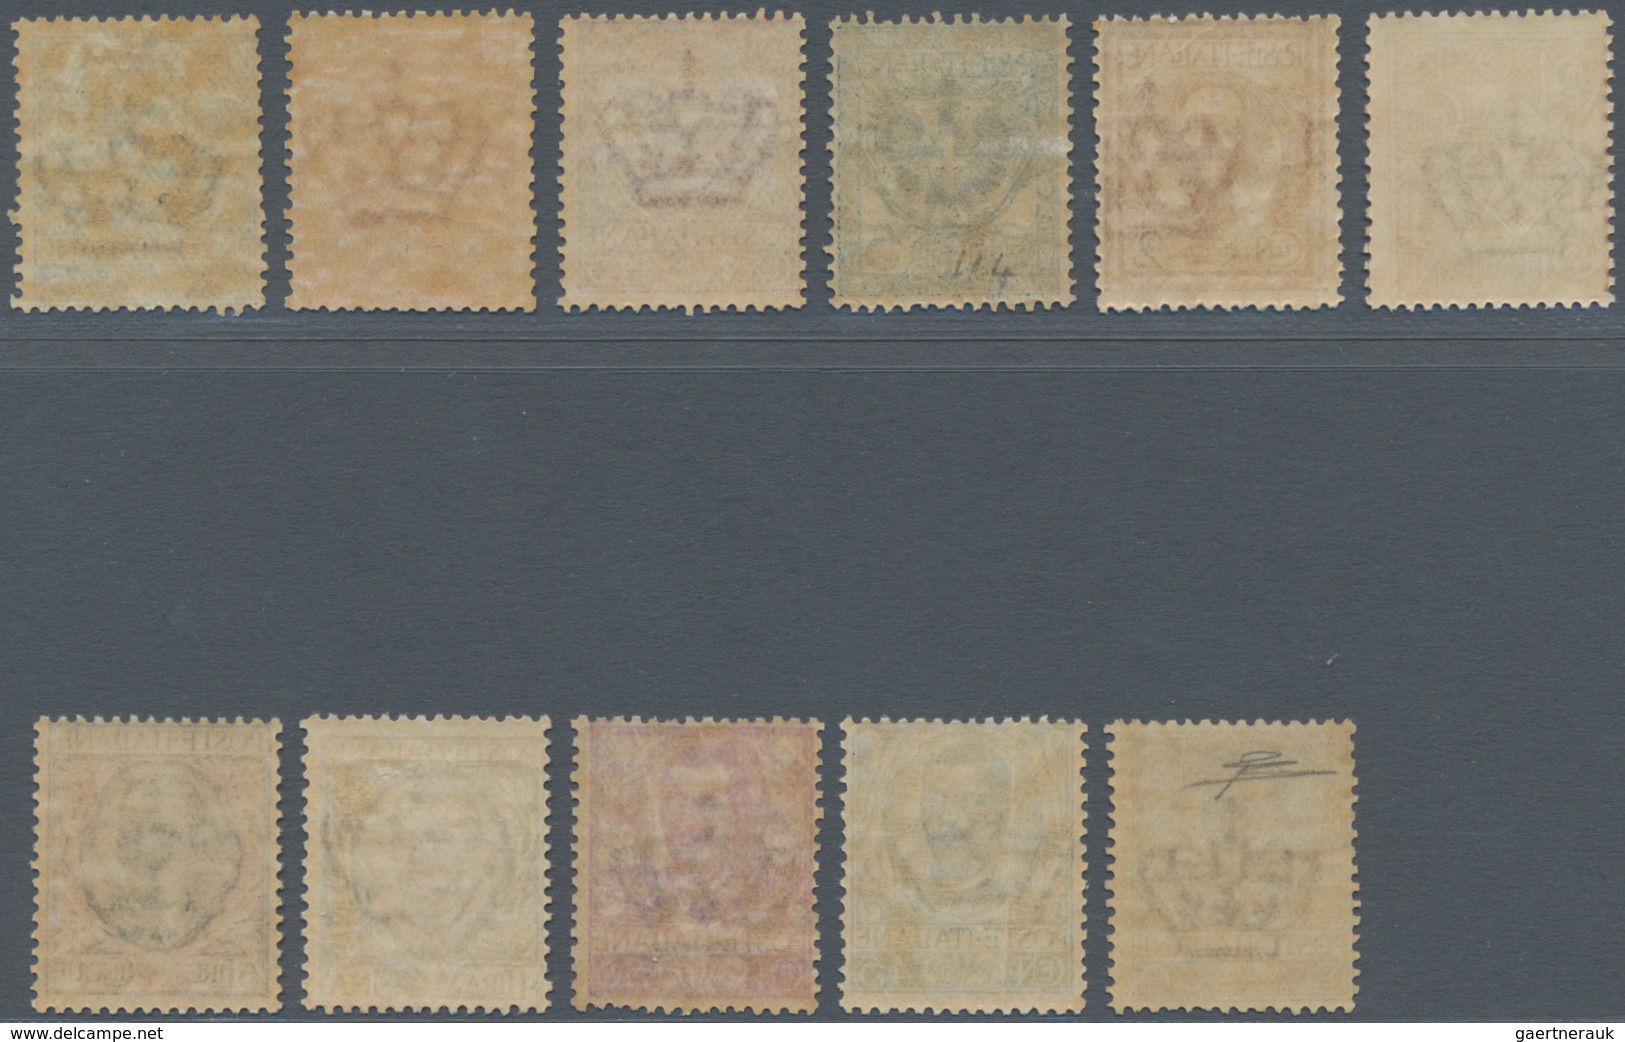 Italien: 1901: "Floreale" Complete Set Of 11 Values, MNH. The 40 Cents With The Certificate Of R. Di - Mint/hinged